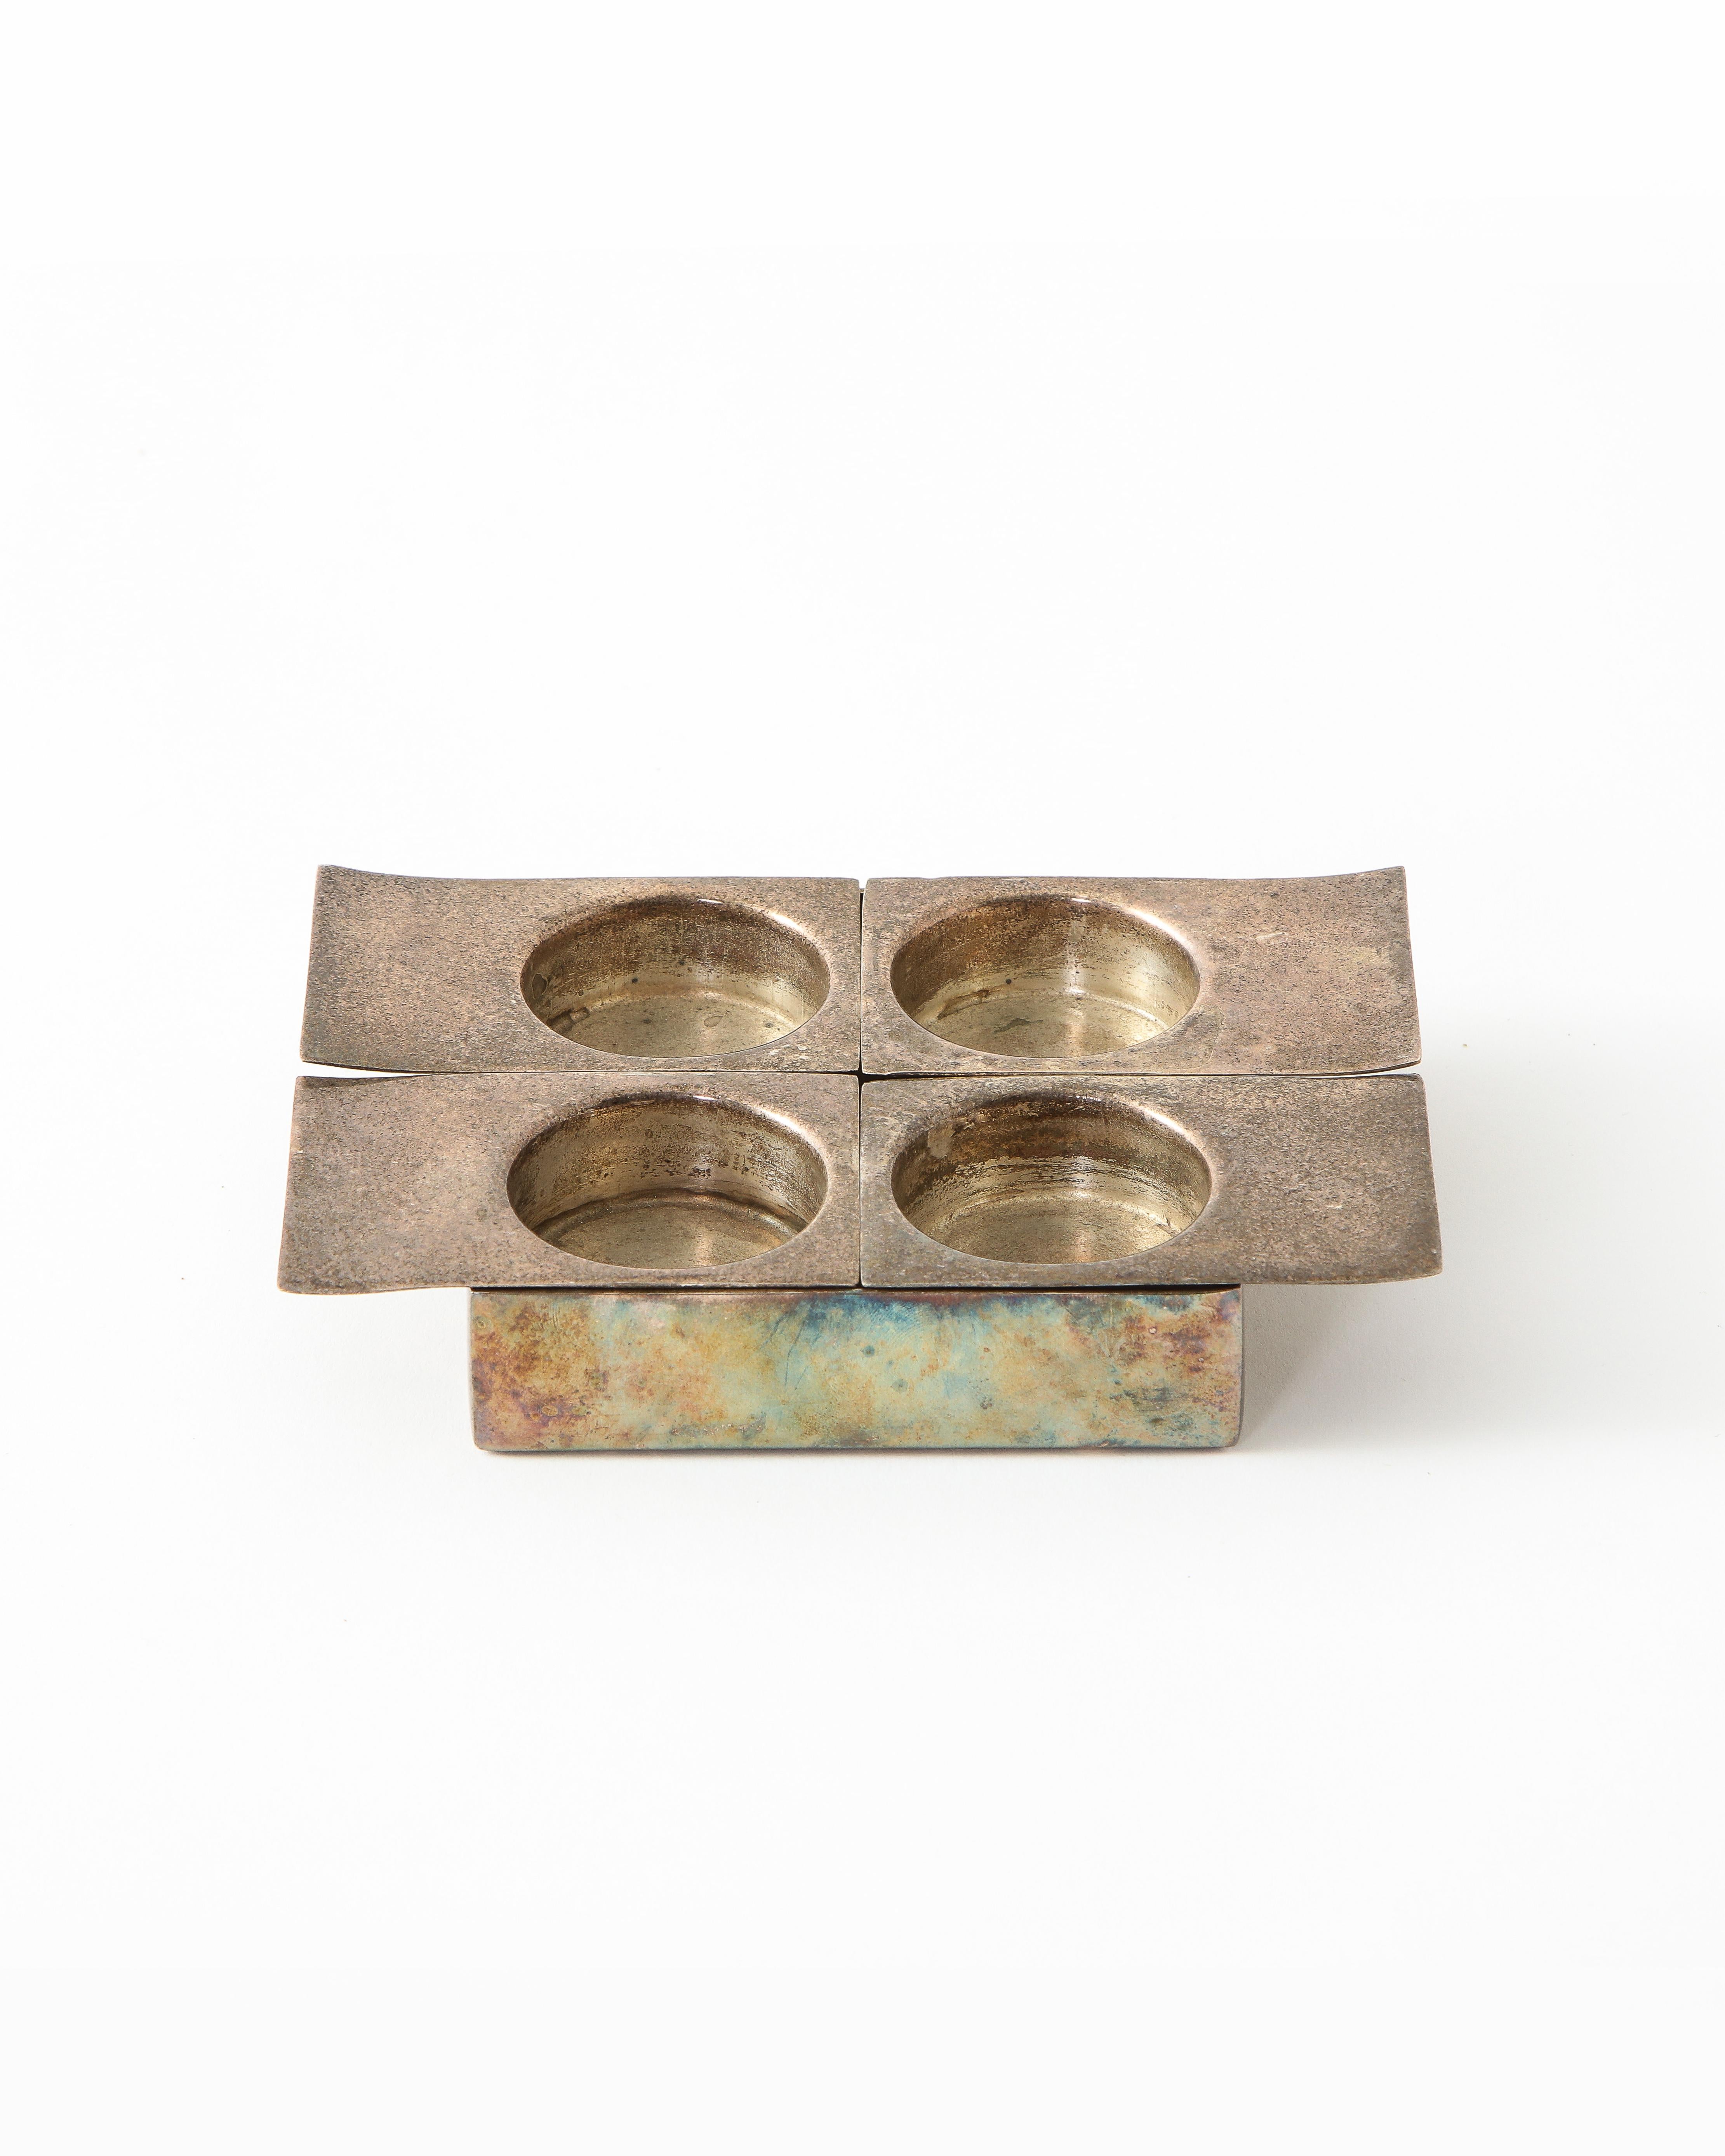 Petite silver plated square tray possessing four removable units each imprinted with a deep circle.

In the style of Lino Sabattini. Impeccable patina.